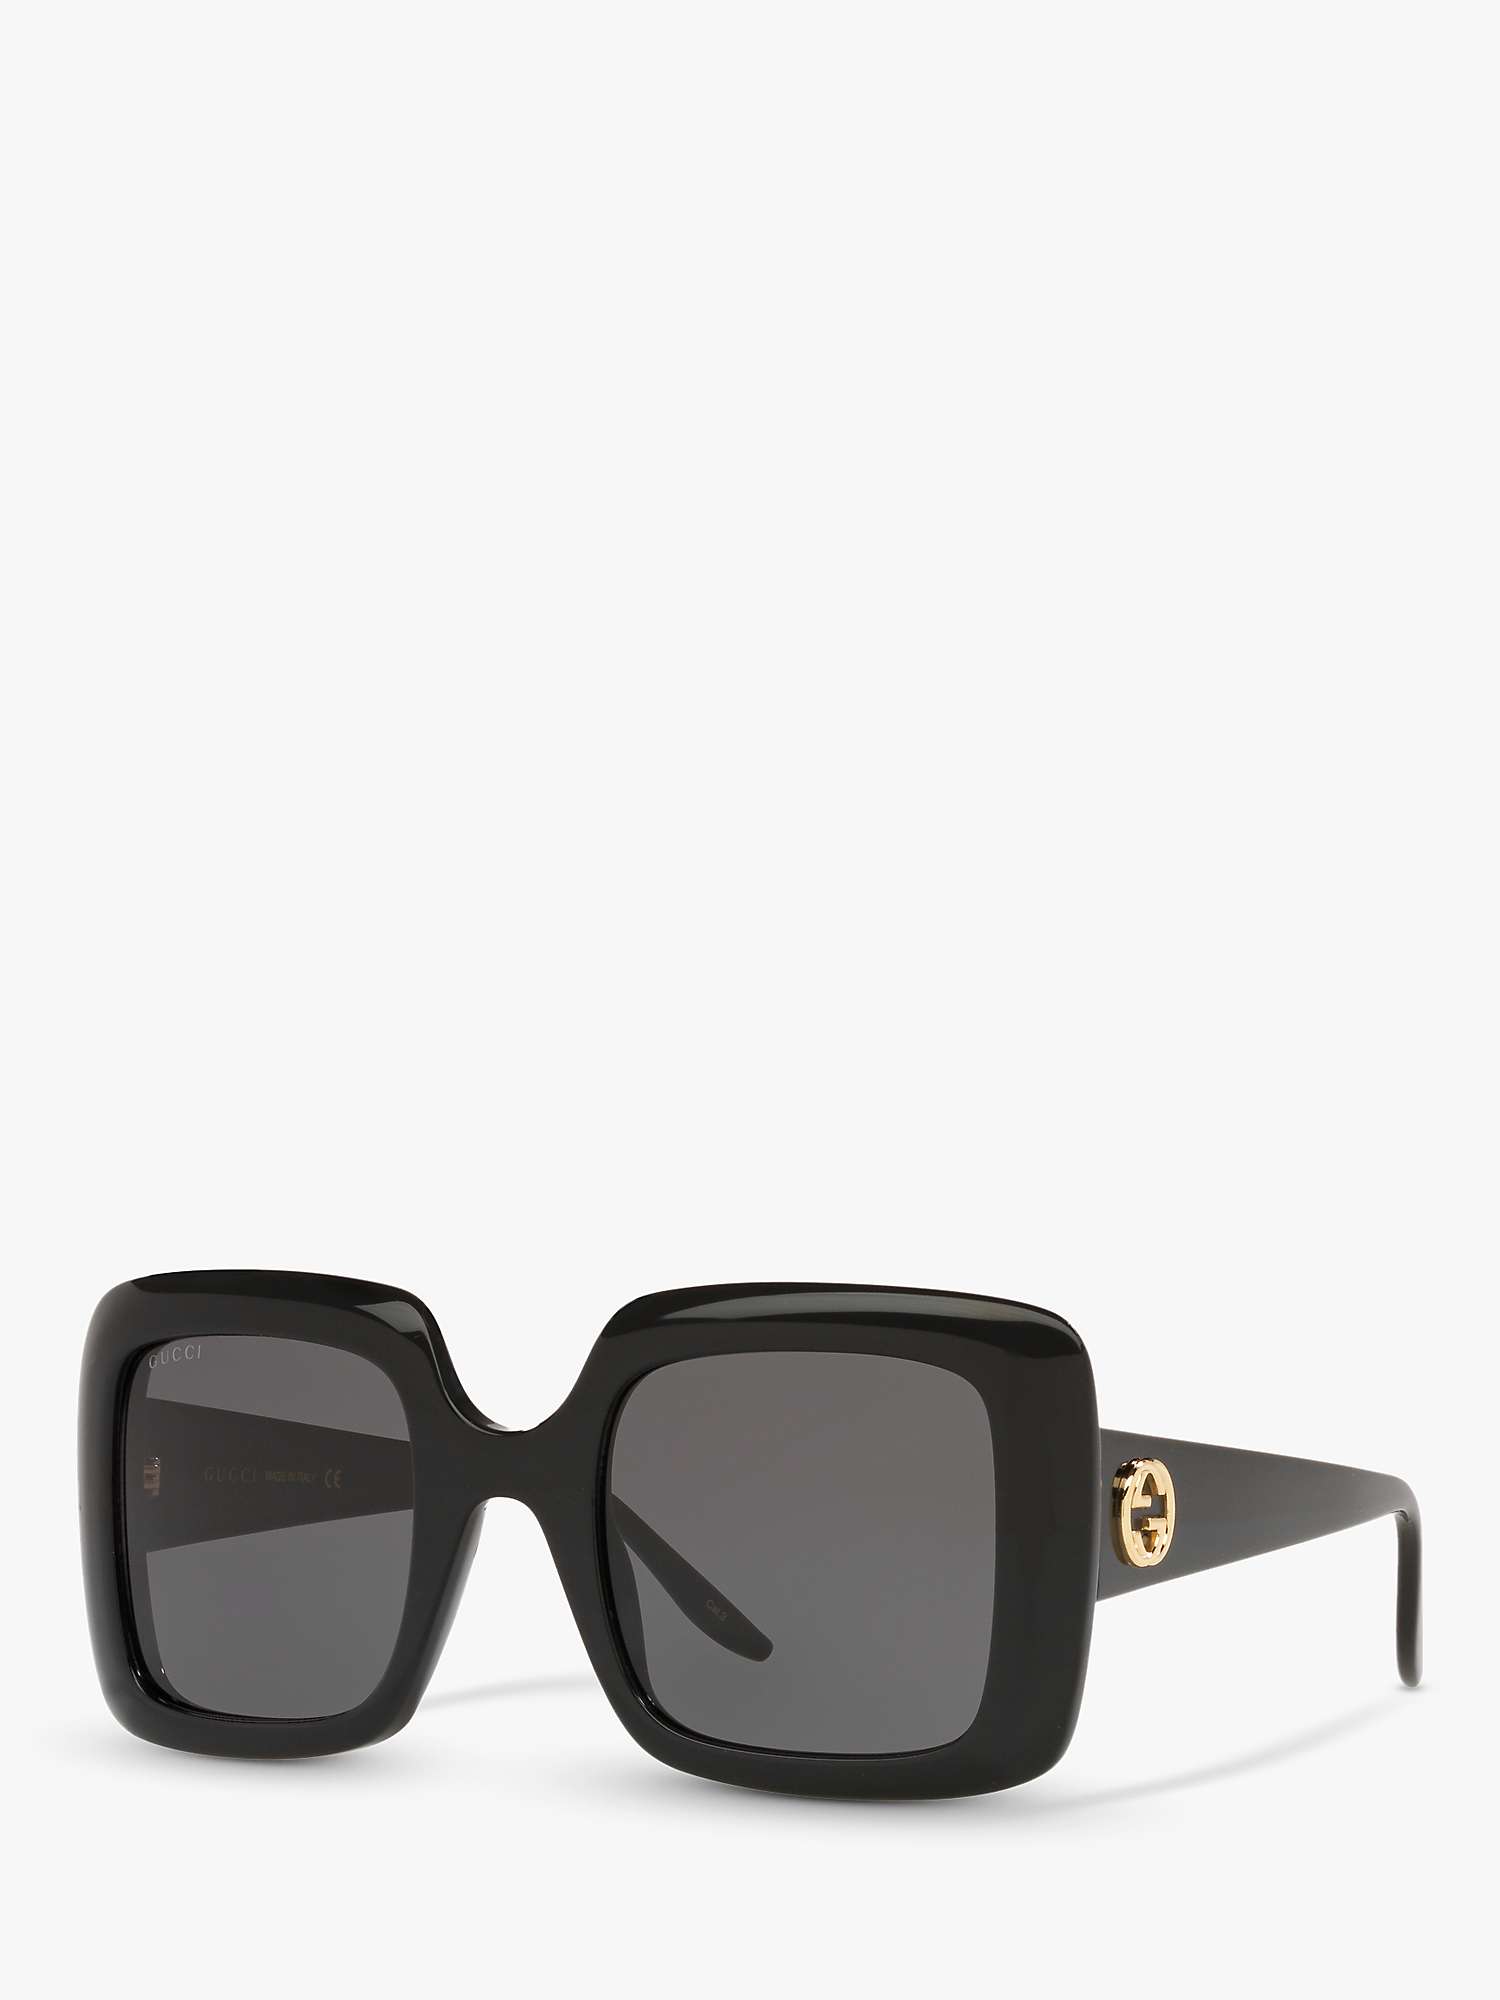 Buy Gucci GG0896S Women's Square Sunglasses Online at johnlewis.com